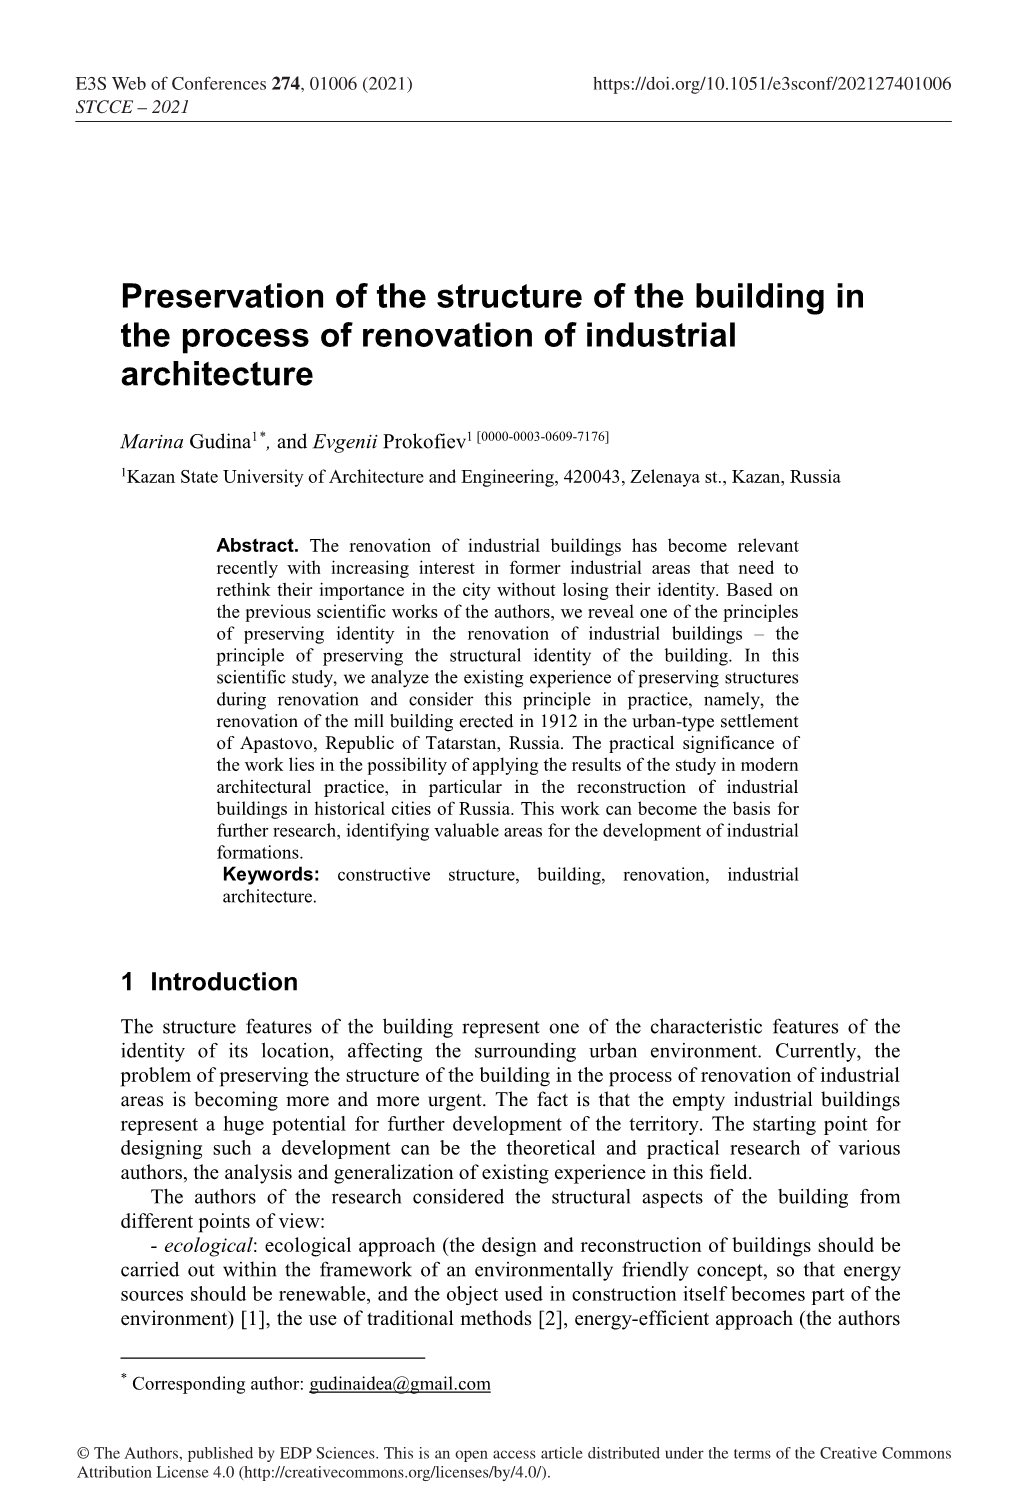 Preservation of the Structure of the Building in the Process of Renovation of Industrial Architecture